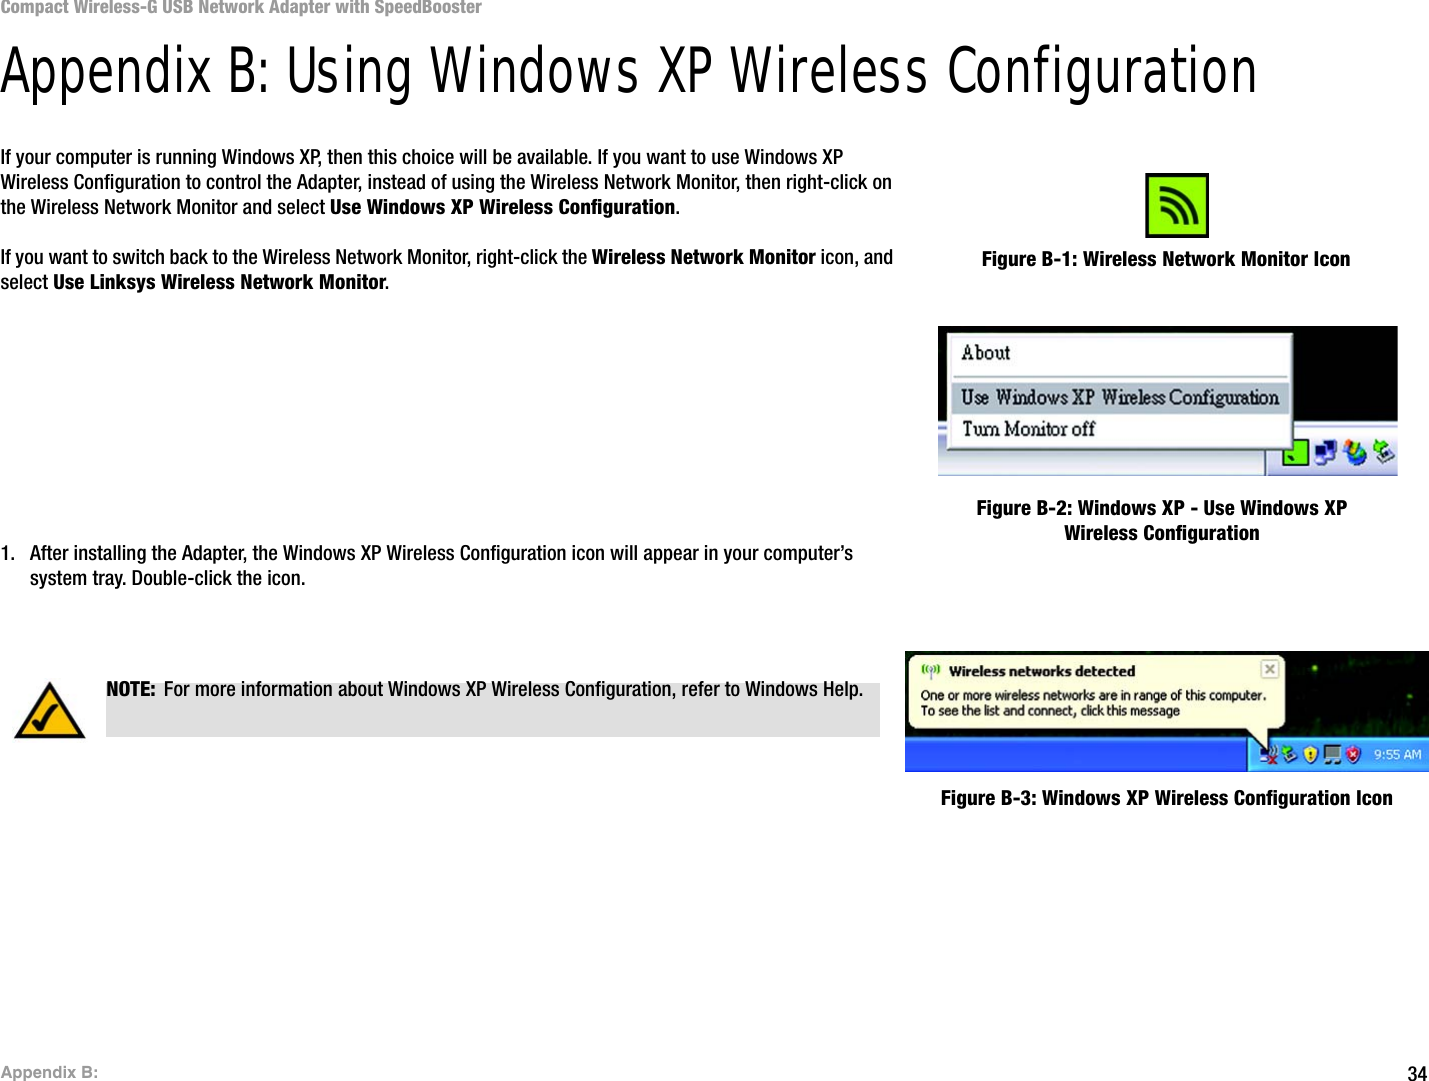 34Appendix B: Compact Wireless-G USB Network Adapter with SpeedBoosterAppendix B: Using Windows XP Wireless ConfigurationIf your computer is running Windows XP, then this choice will be available. If you want to use Windows XP Wireless Configuration to control the Adapter, instead of using the Wireless Network Monitor, then right-click on the Wireless Network Monitor and select Use Windows XP Wireless Configuration. If you want to switch back to the Wireless Network Monitor, right-click the Wireless Network Monitor icon, and select Use Linksys Wireless Network Monitor.1. After installing the Adapter, the Windows XP Wireless Configuration icon will appear in your computer’s system tray. Double-click the icon. Figure B-1: Wireless Network Monitor IconFigure B-2: Windows XP - Use Windows XP Wireless ConfigurationNOTE: For more information about Windows XP Wireless Configuration, refer to Windows Help.Figure B-3: Windows XP Wireless Configuration Icon